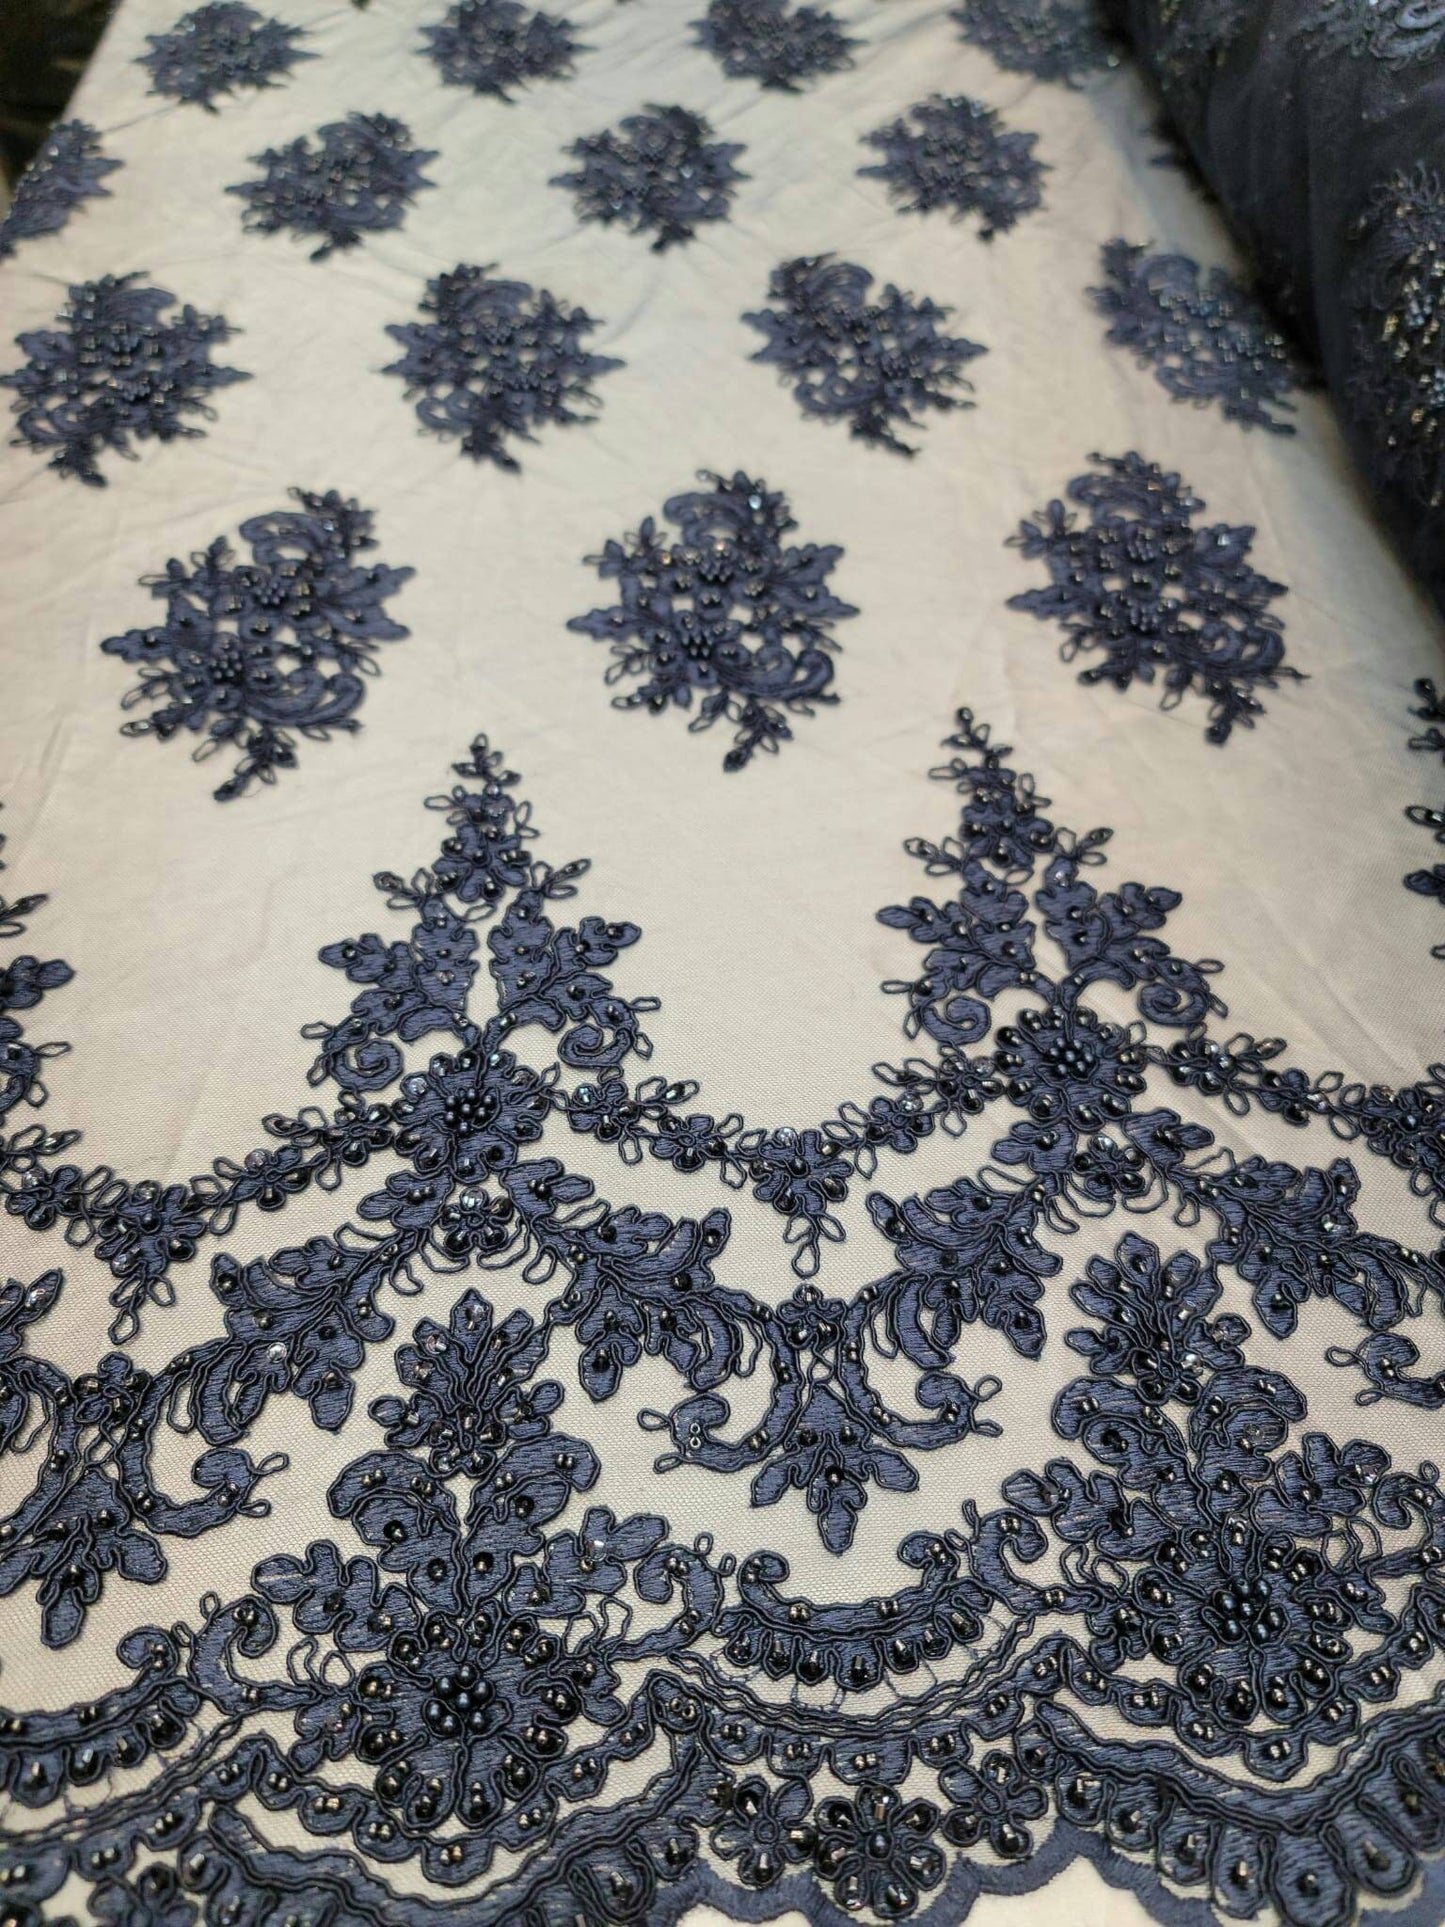 Navy Blue Beaded Lace Embroidery Floral Flowers Fabric By The Yard Sequin On Mesh Double Scallops Quinceañera Bridal Evening Dress